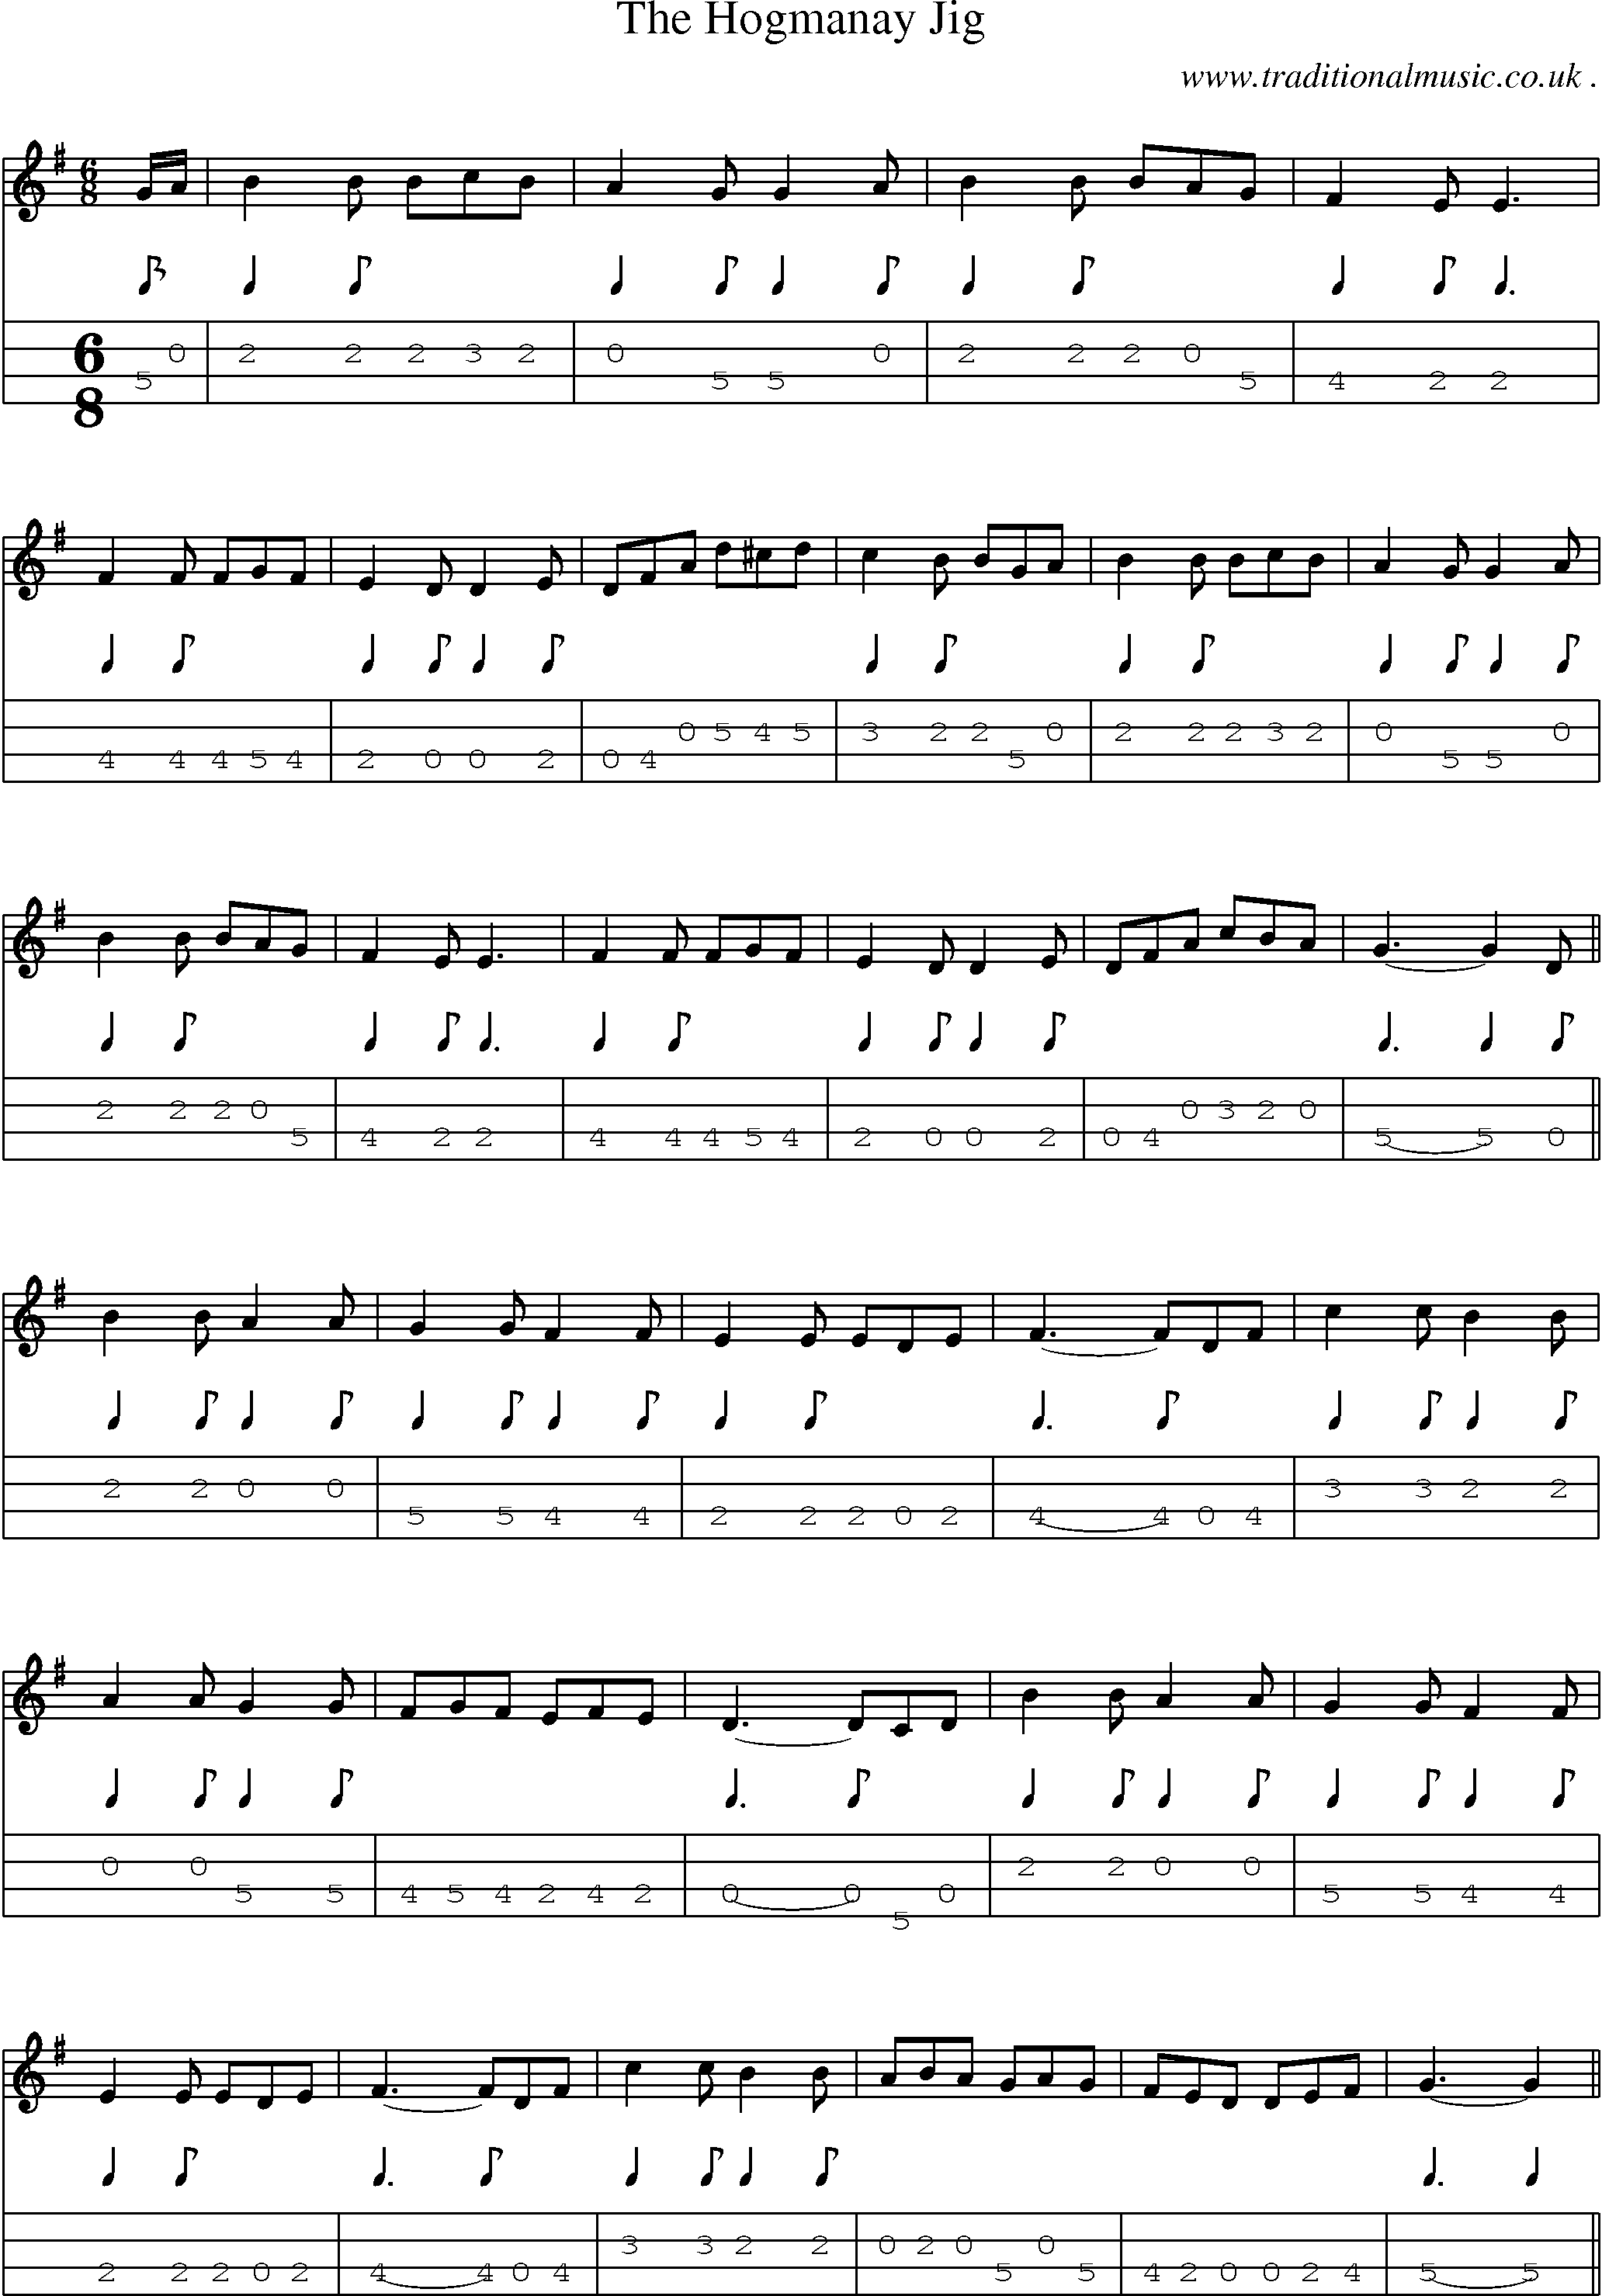 Sheet-Music and Mandolin Tabs for The Hogmanay Jig